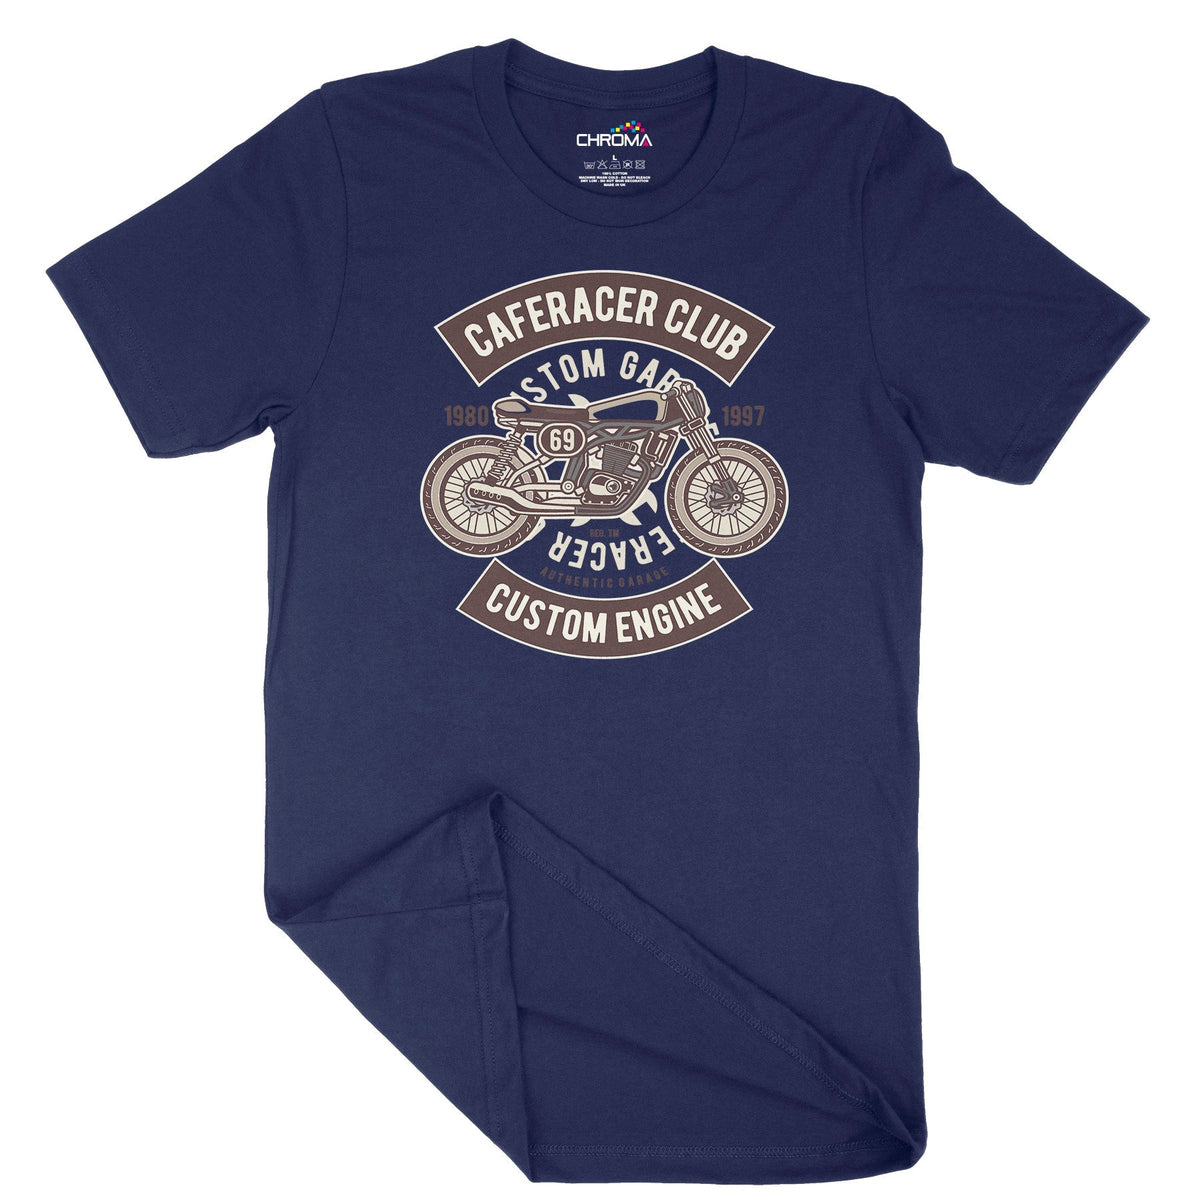 Caferacer Club | Vintage Adult T-Shirt | Classic Vintage Clothing Chroma Clothing